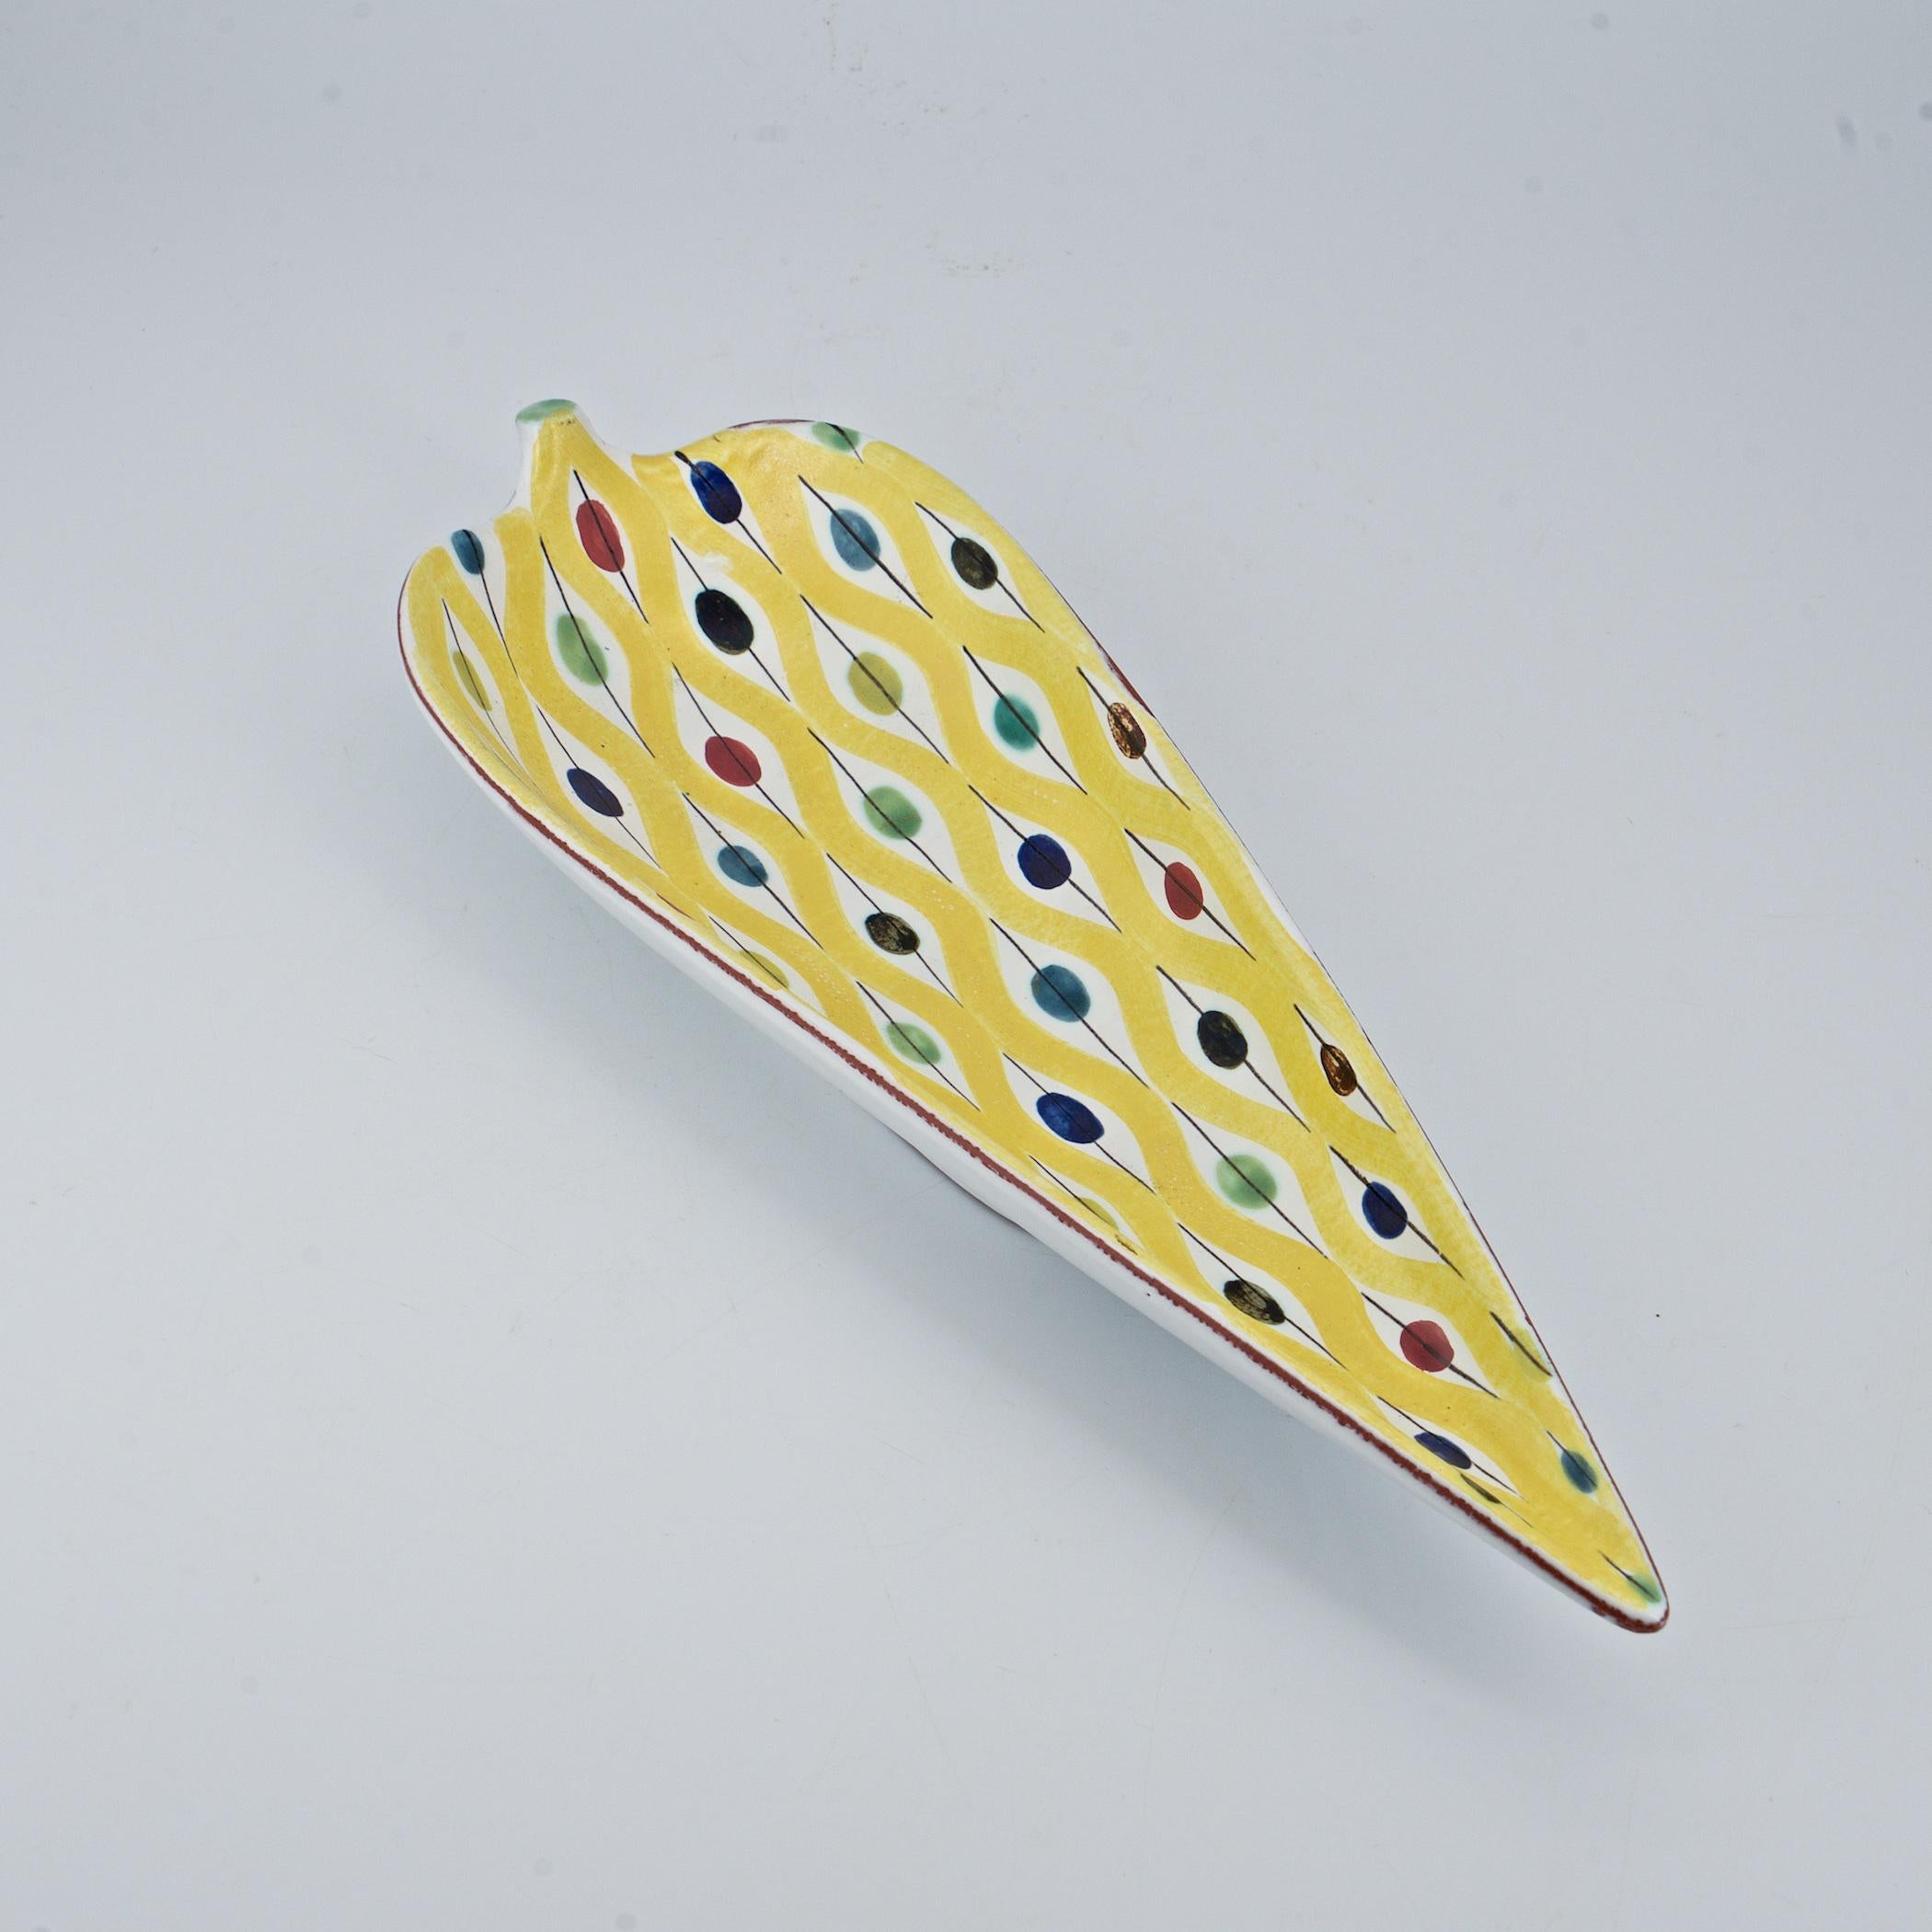 Wonderful and iconic Lindberg hand-painted pattern in lemon yellow. No chips, and no cracks, but there are some glaze skips to front left tip and rear side of stem, pictured. Just over 12 inches long.

